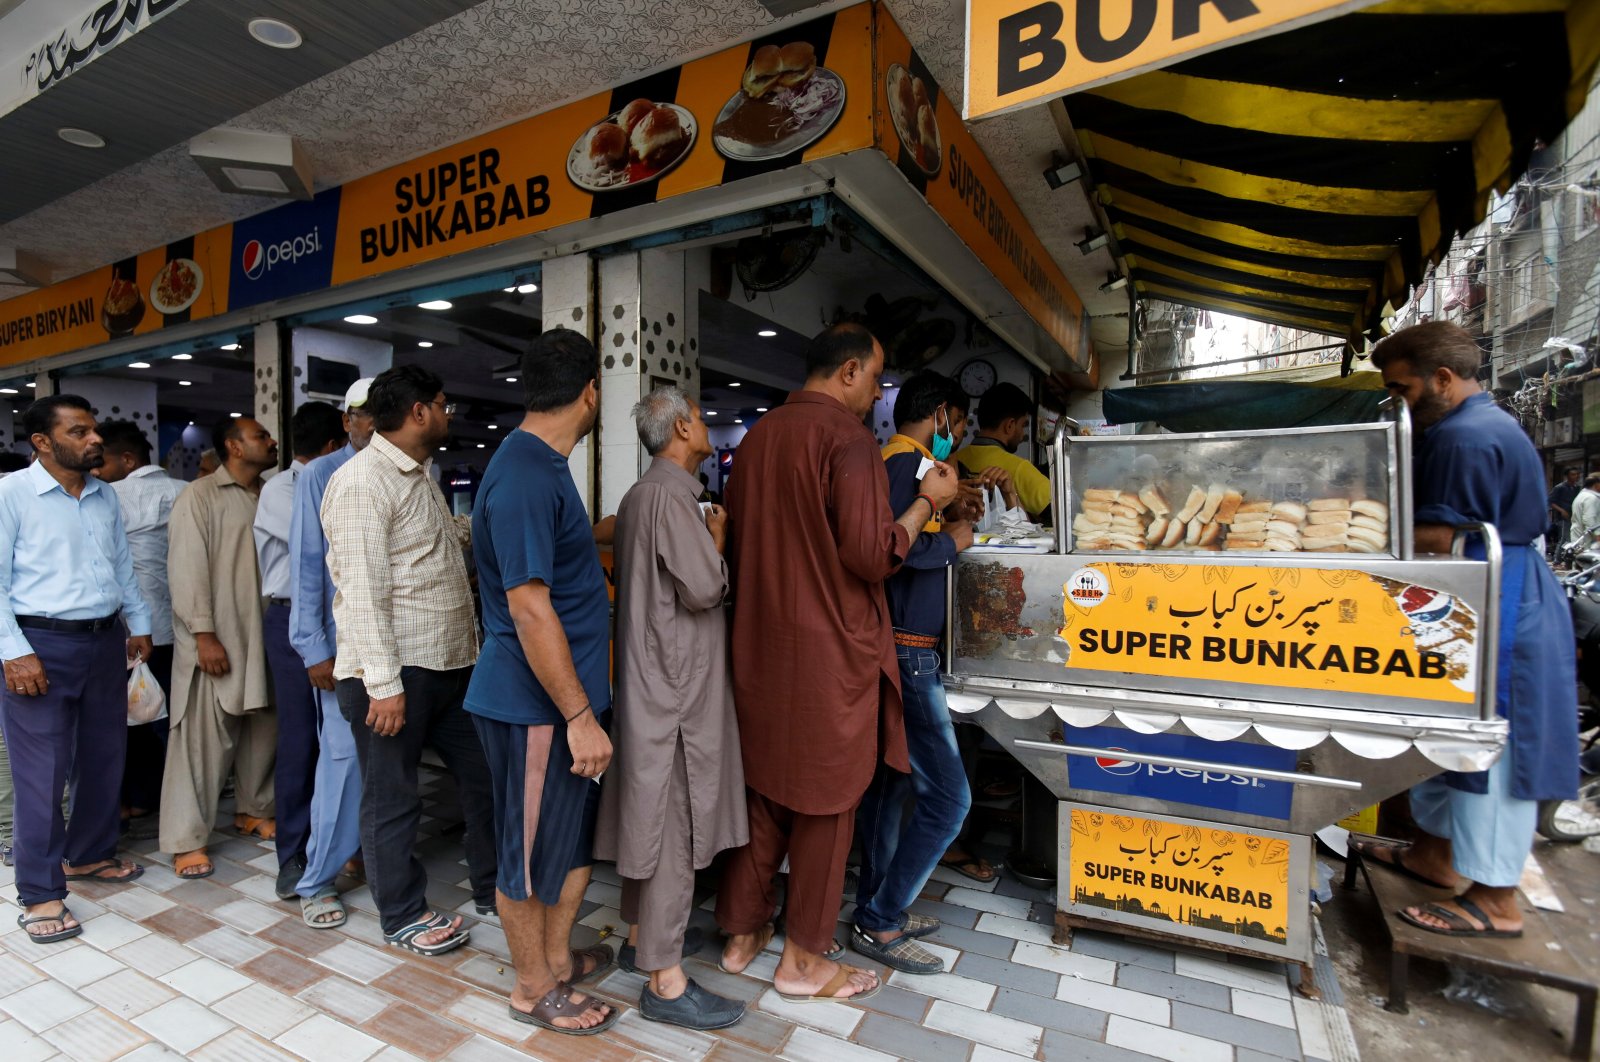 People wait for their turn to buy low-priced bun-kabab from a shop in Karachi, Pakistan, June 10, 2022. (Reuters Photo)